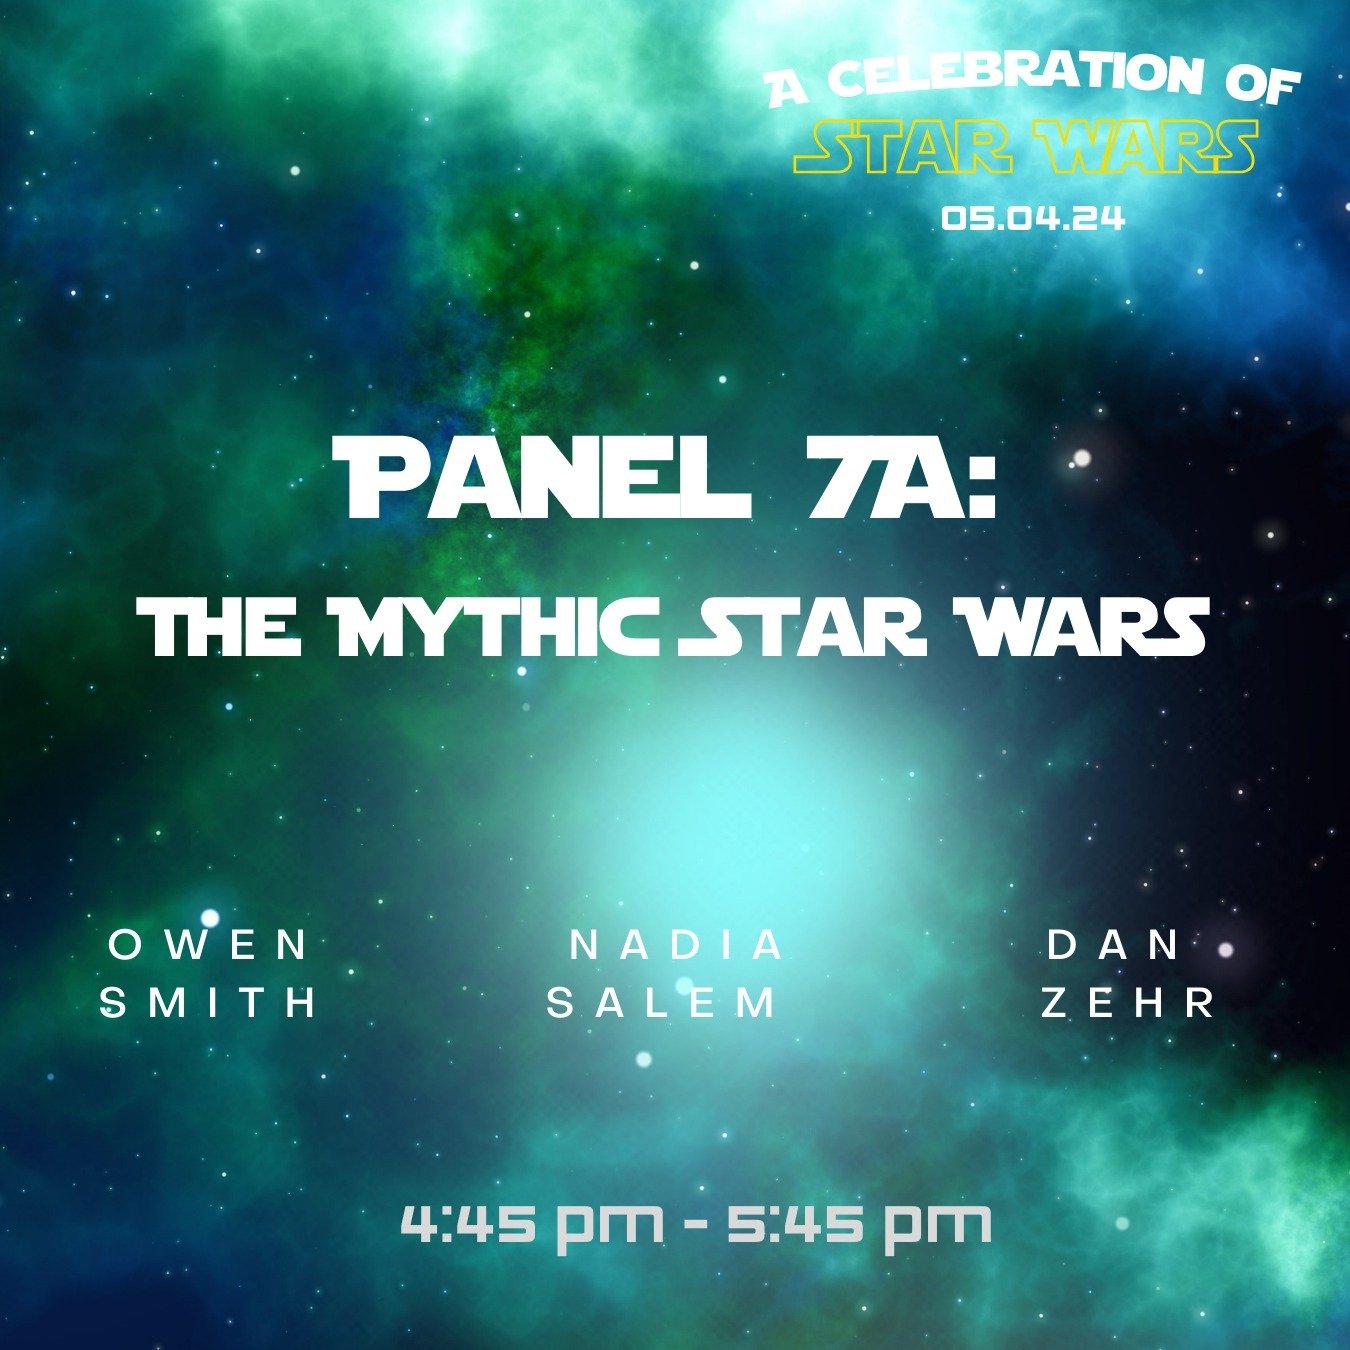 Panel 7A, &ldquo;The Mythic Star Wars,&rdquo; will be taking place in Room 806 and online from 4:45 pm - 5:45 pm!